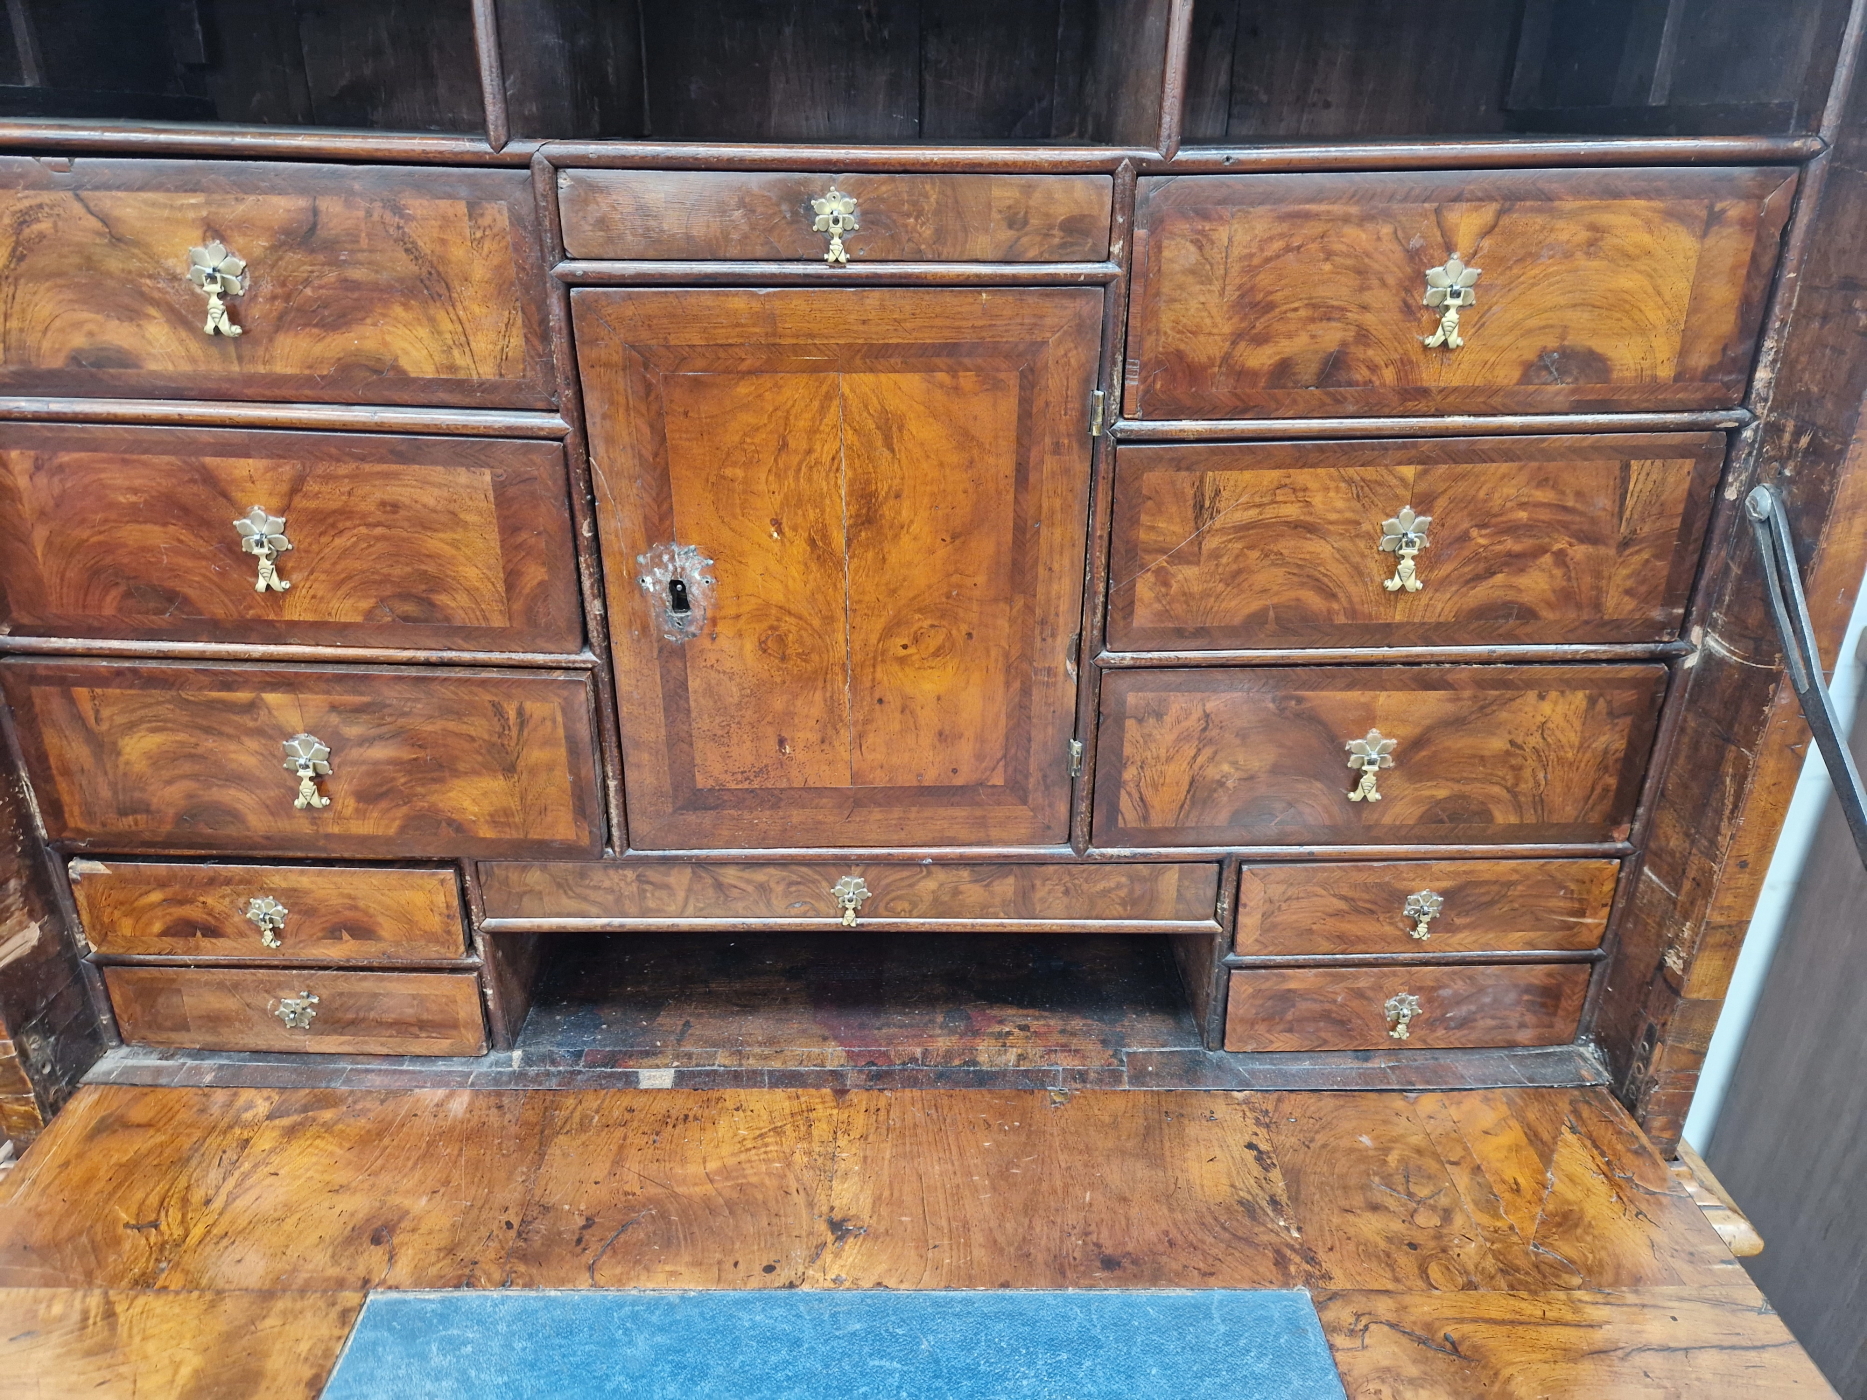 AN EARLY 18th C. WALNUT DROP FRONT BUREAU CHEST, AN OVOLO FRONT DRAWER ABOVE THE FALL, THE BASE WITH - Image 5 of 9